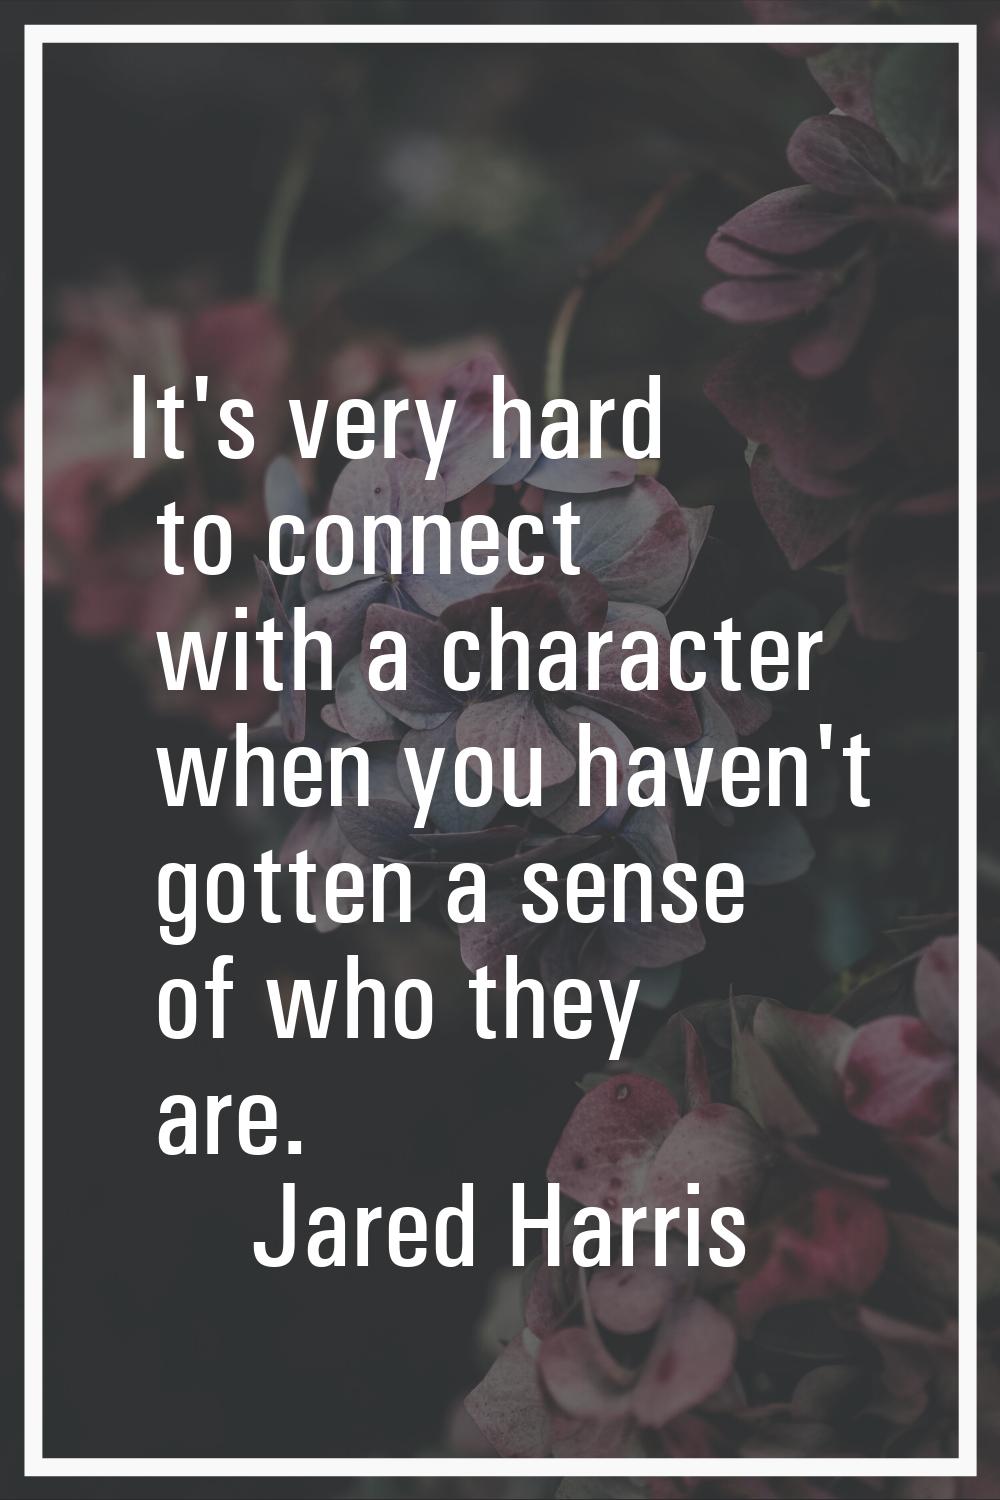 It's very hard to connect with a character when you haven't gotten a sense of who they are.